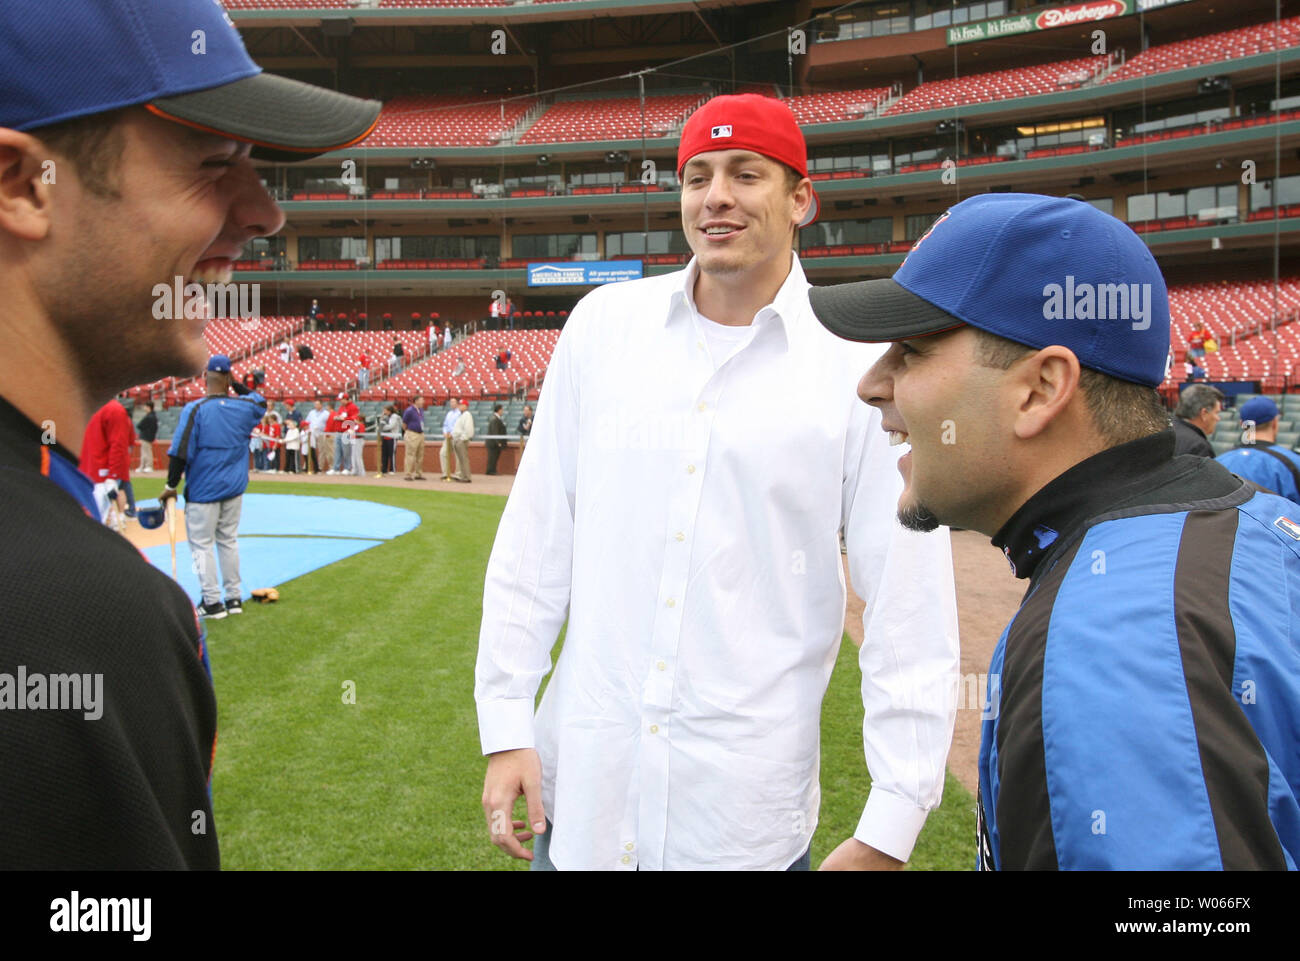 New York Mets David Wright (L) and Paul LoDuca  (R) share a laugh with friend, New York Knicks David Lee before a game with the St. Louis Cardinals at Busch Stadium in St. Louis on May 16, 2006.    (UPI Photo/Bill Greenblatt) Stock Photo